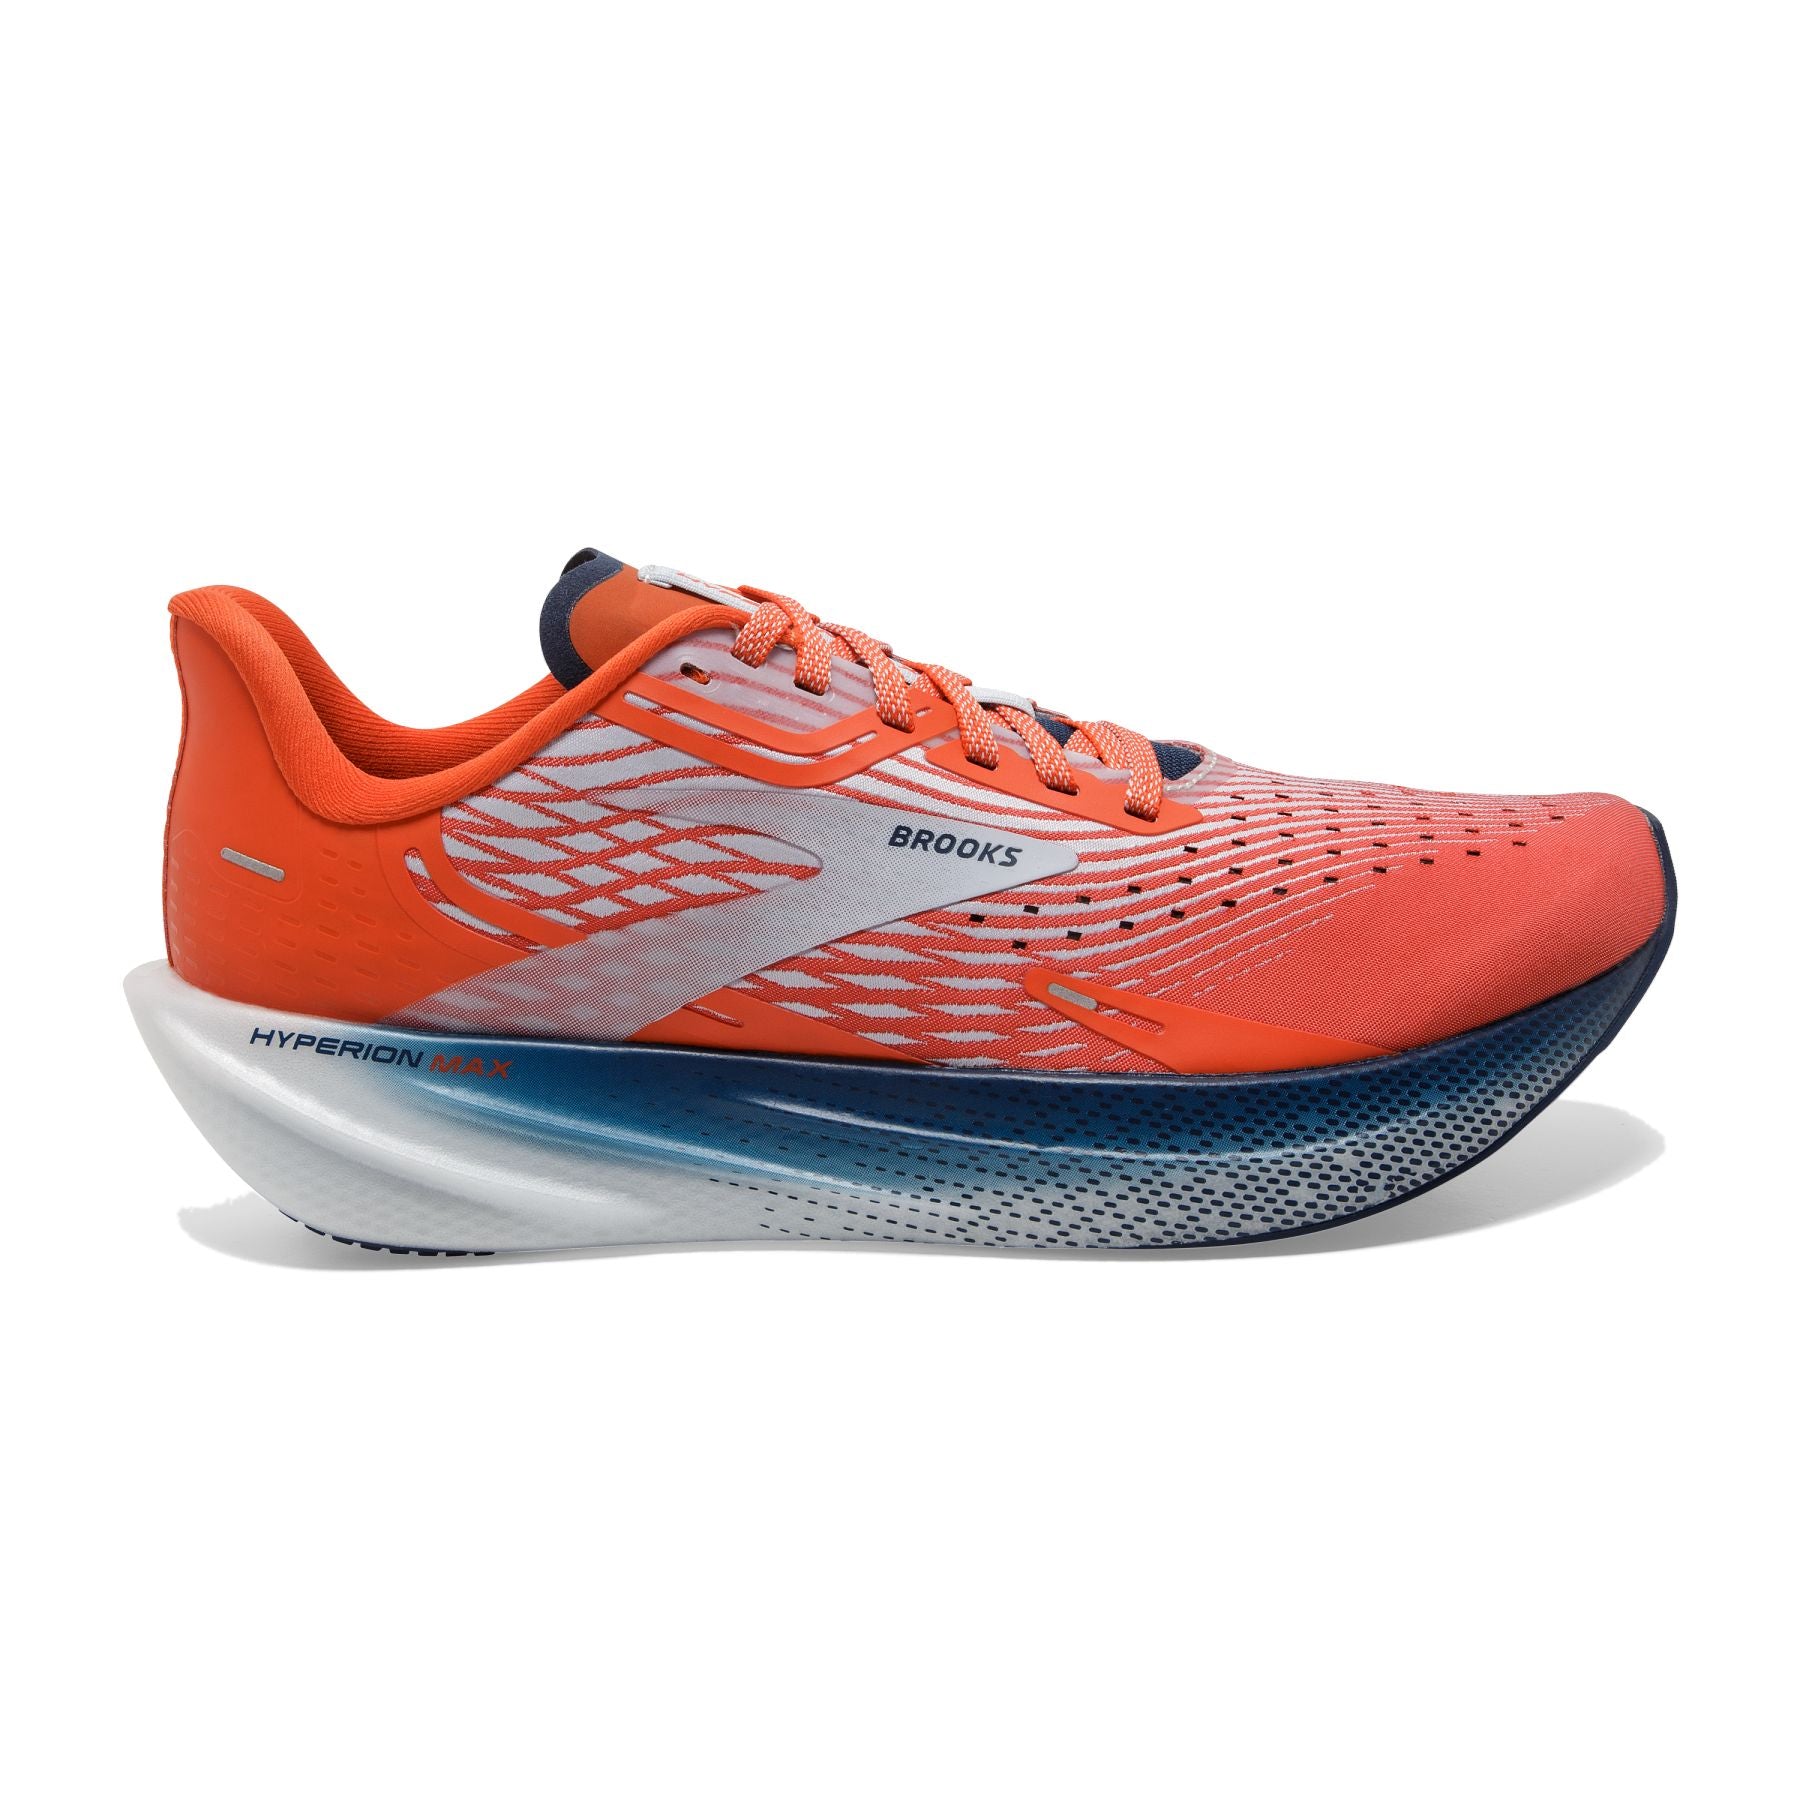 Lateral view of the Men's Hyperion Max by BROOKS in the color Cherry Tomato/Arctic Ice/Titan